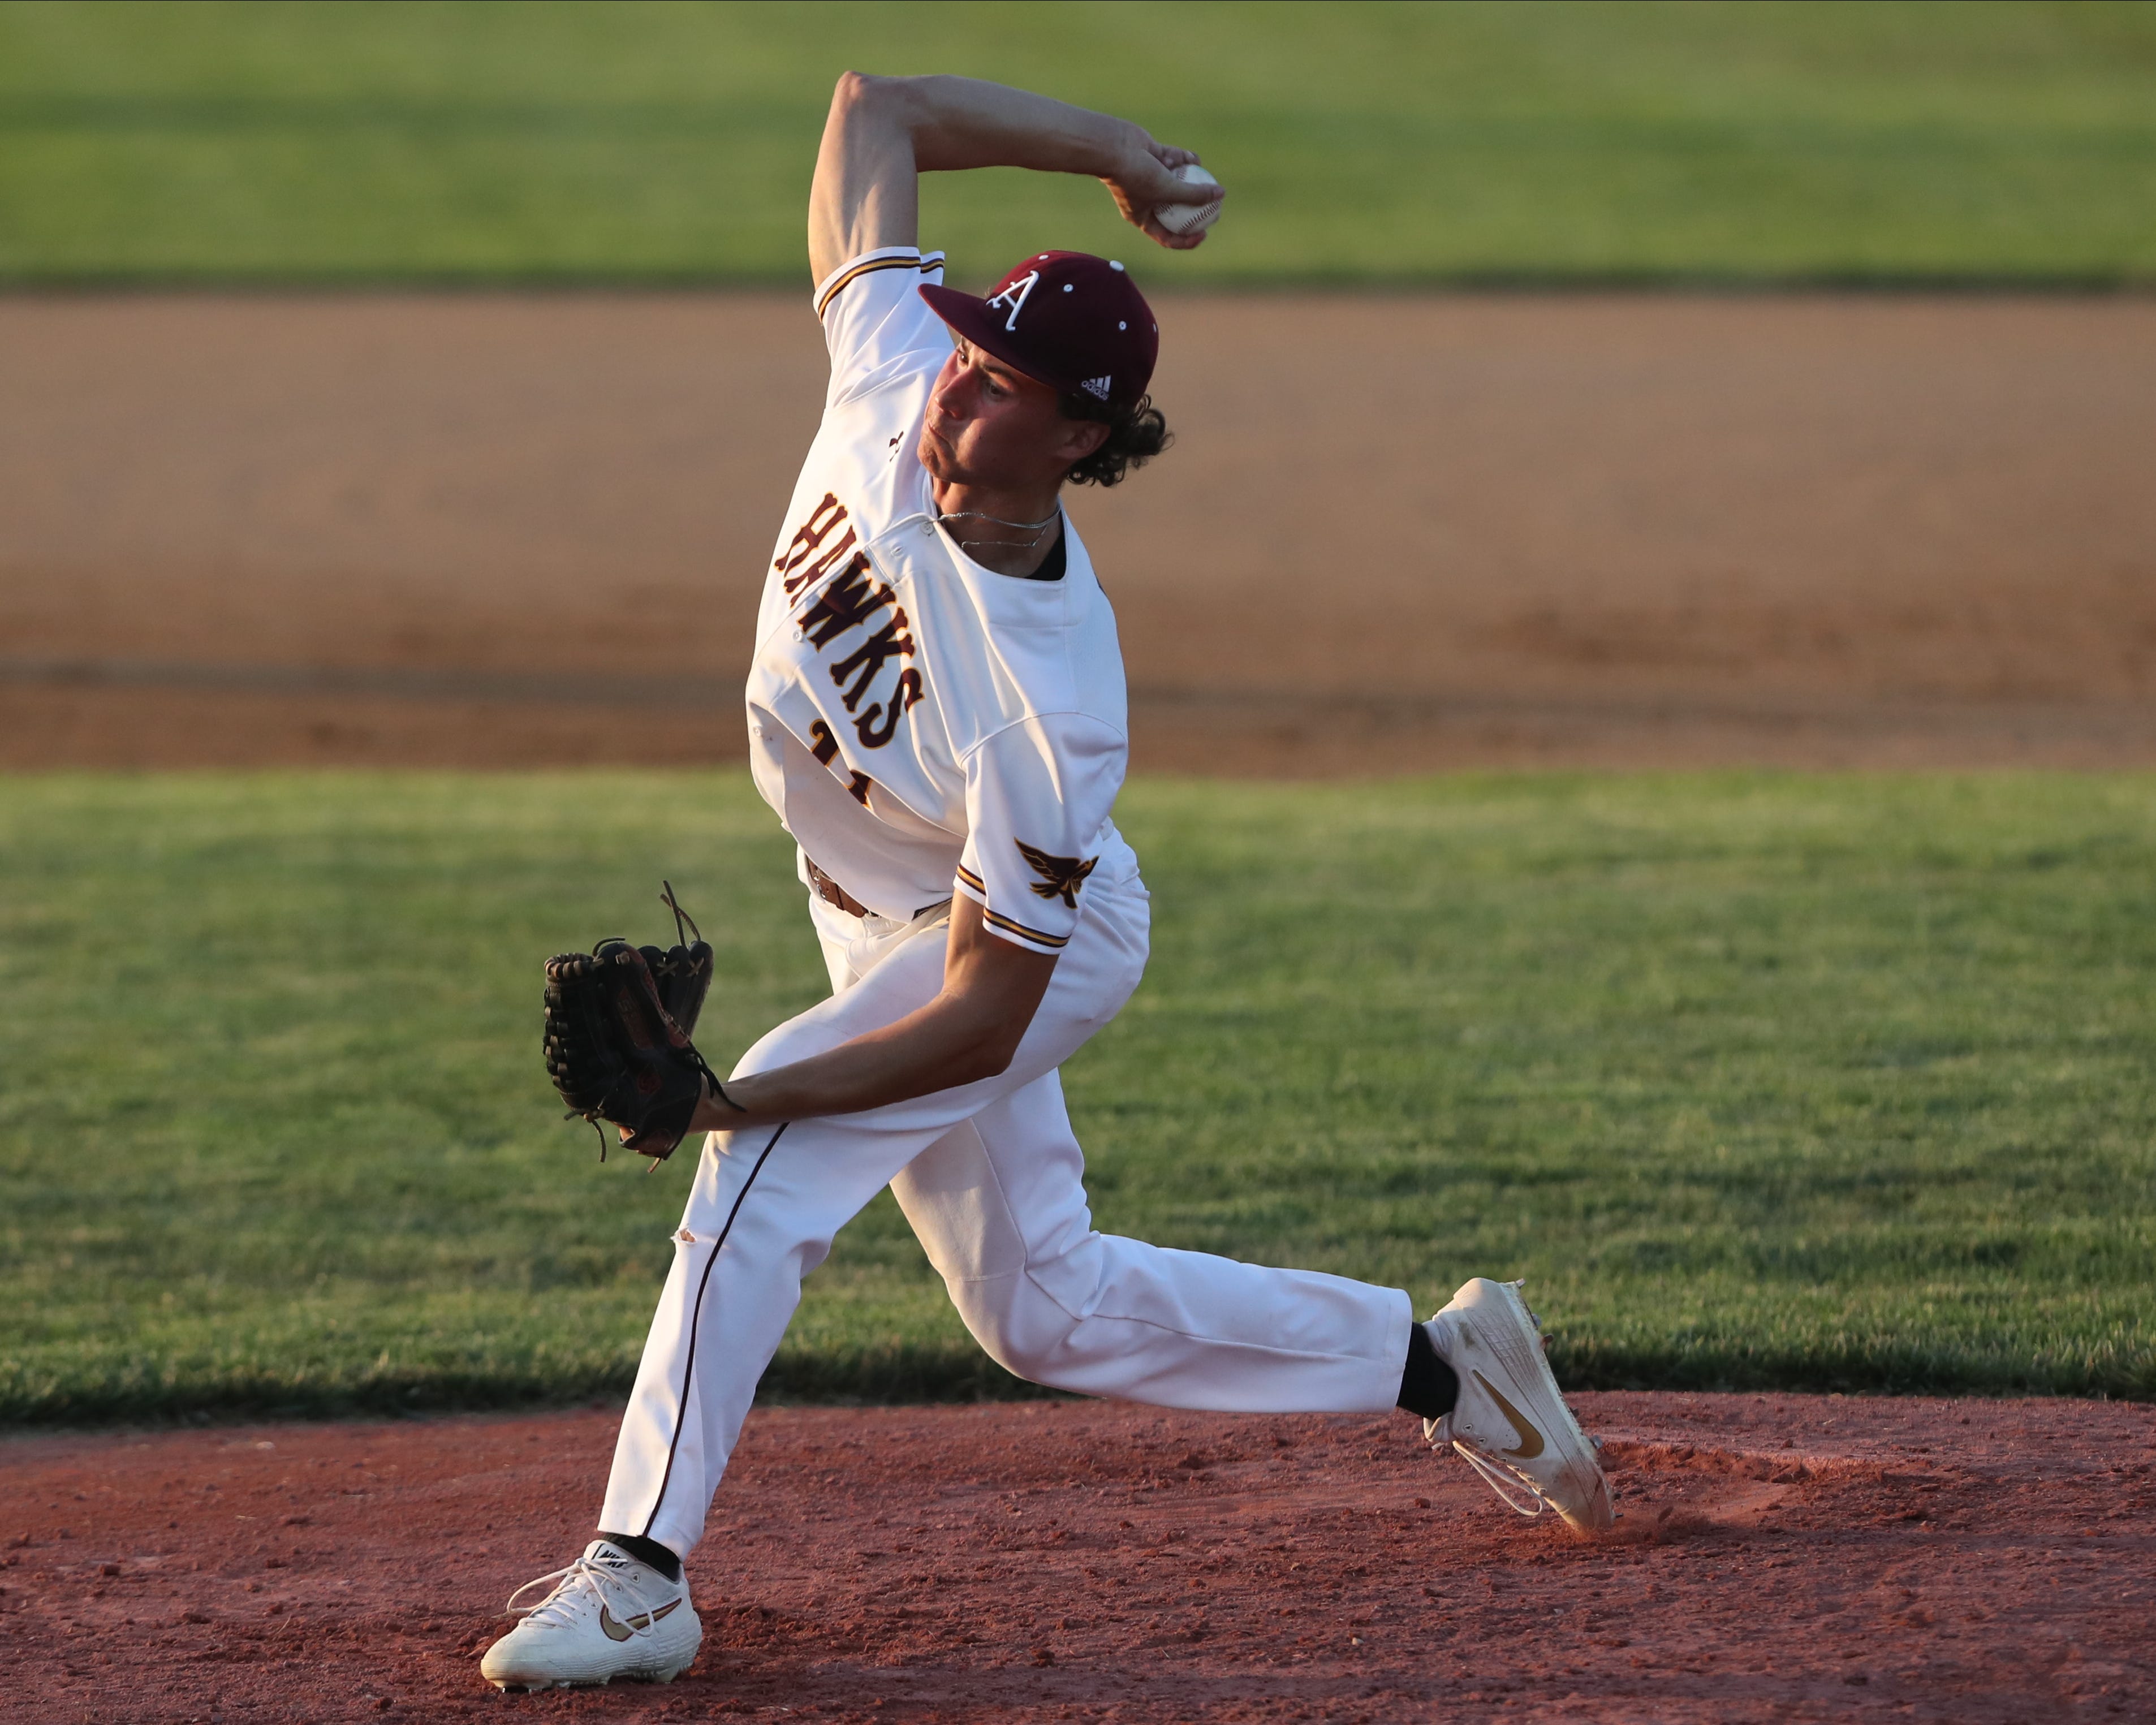 Iowa state baseball: Brody Brecht, Ankeny defeat Pleasant Valley in the Class 4A state quarterfinals